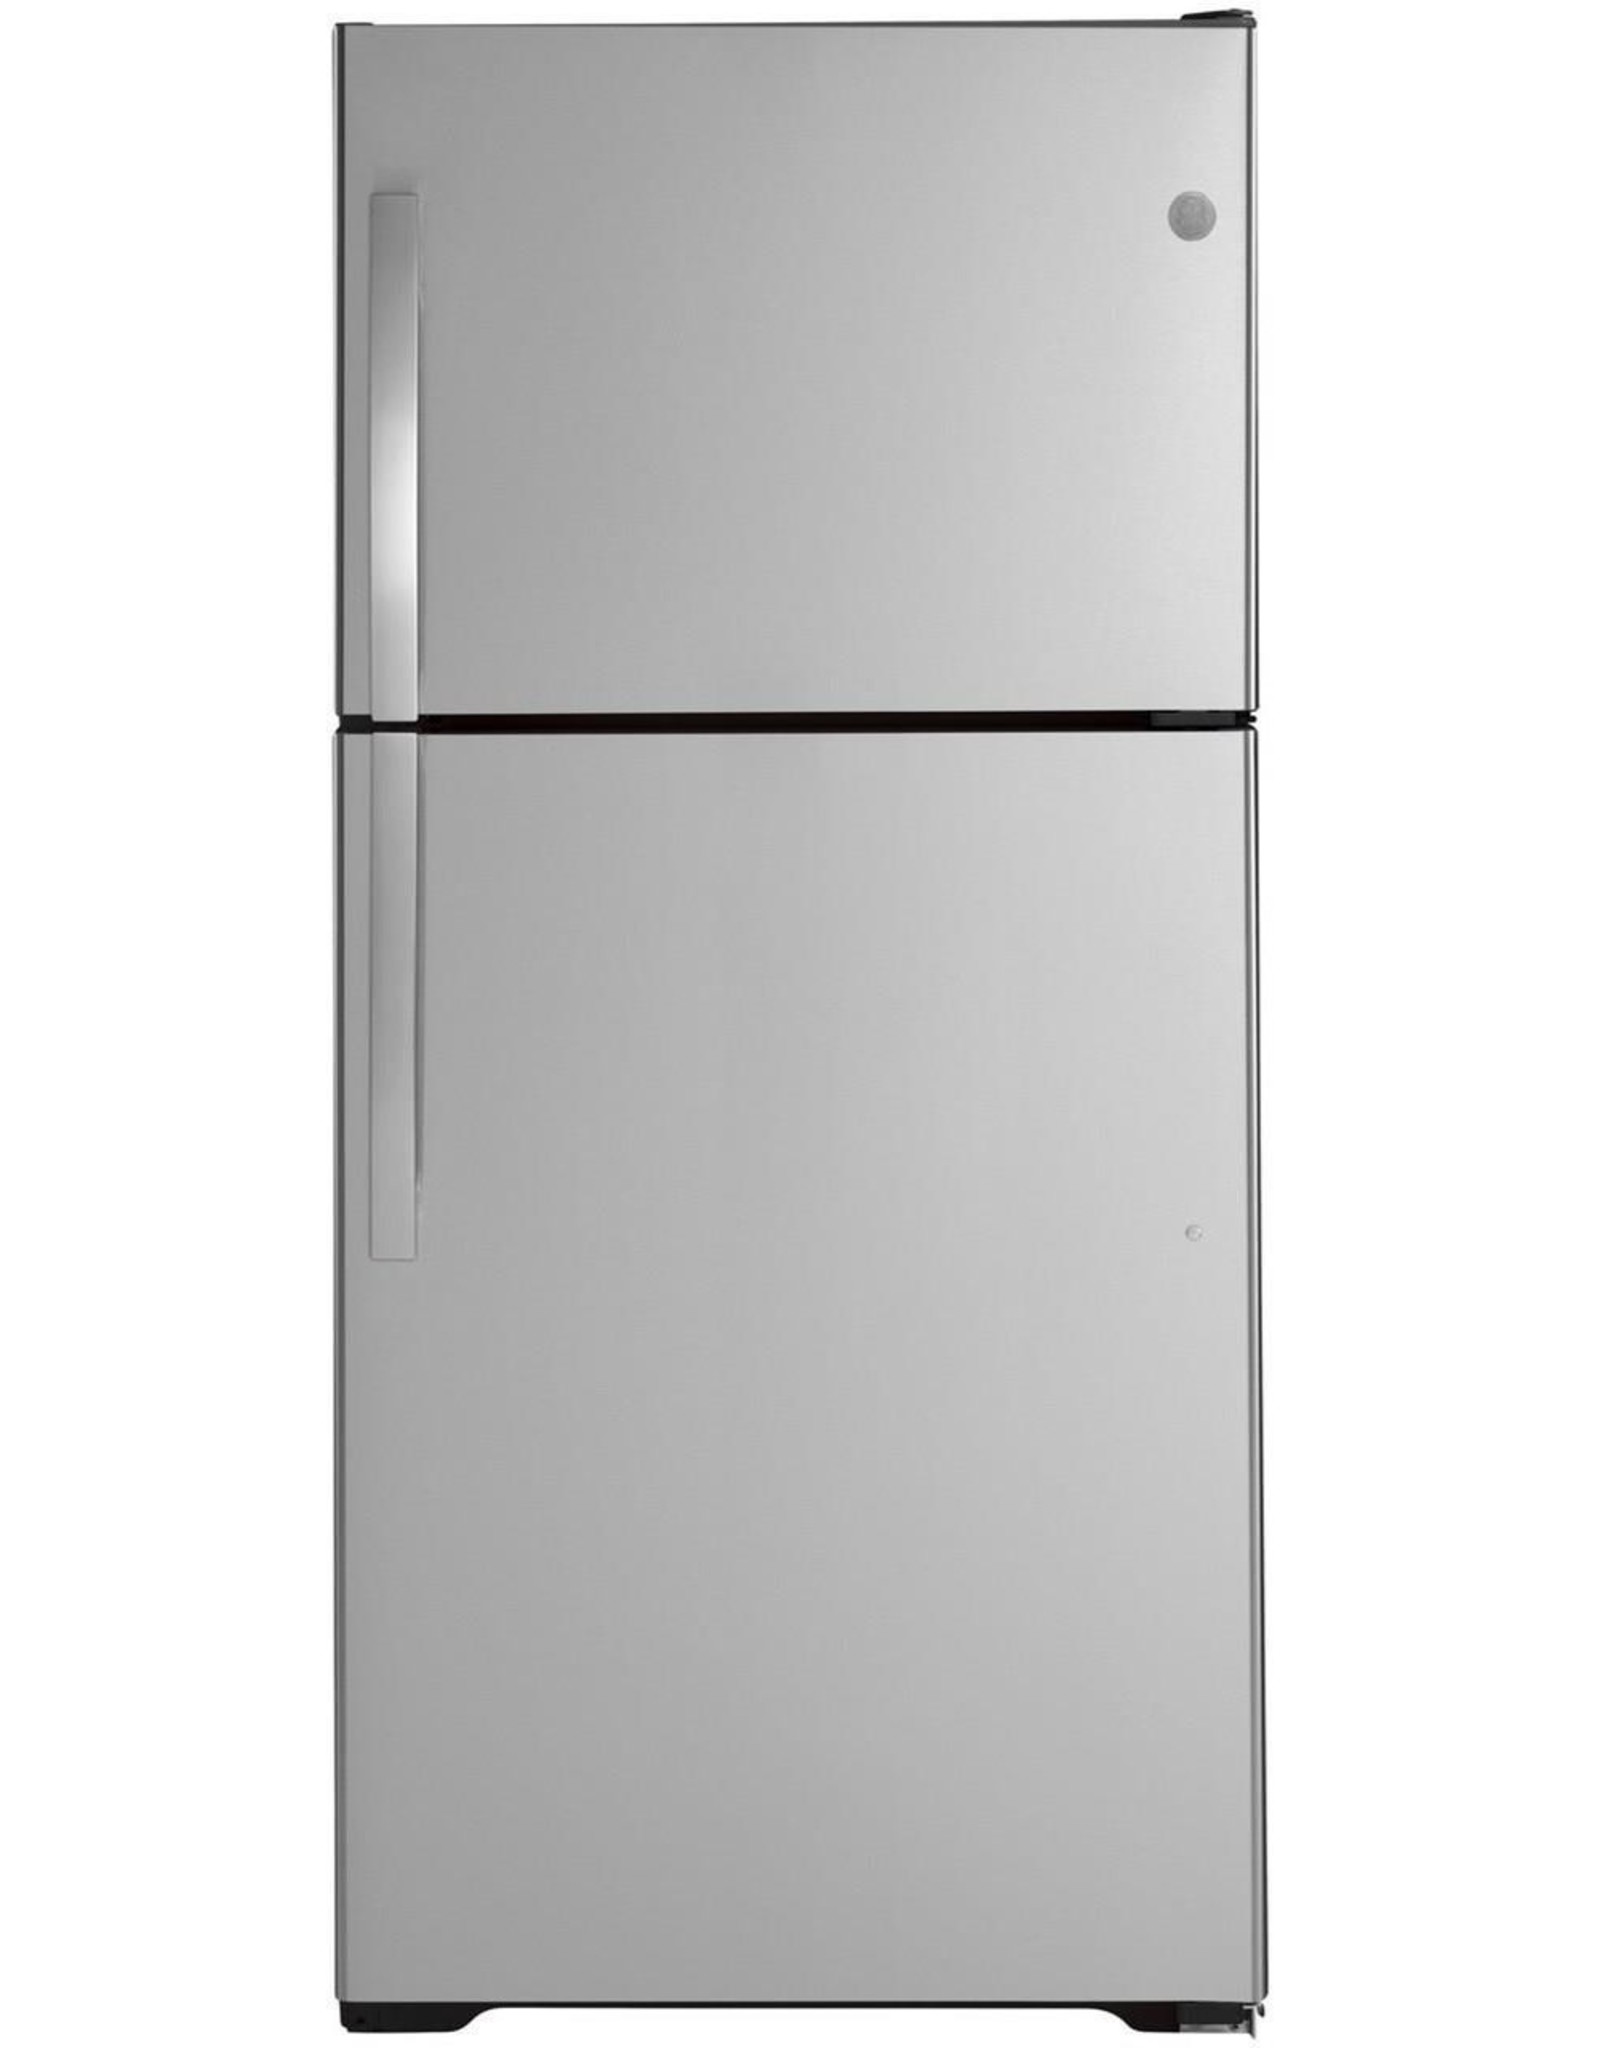 CLS GE 19.2 CU FT Refrigerator: Stainless Steel-CLS